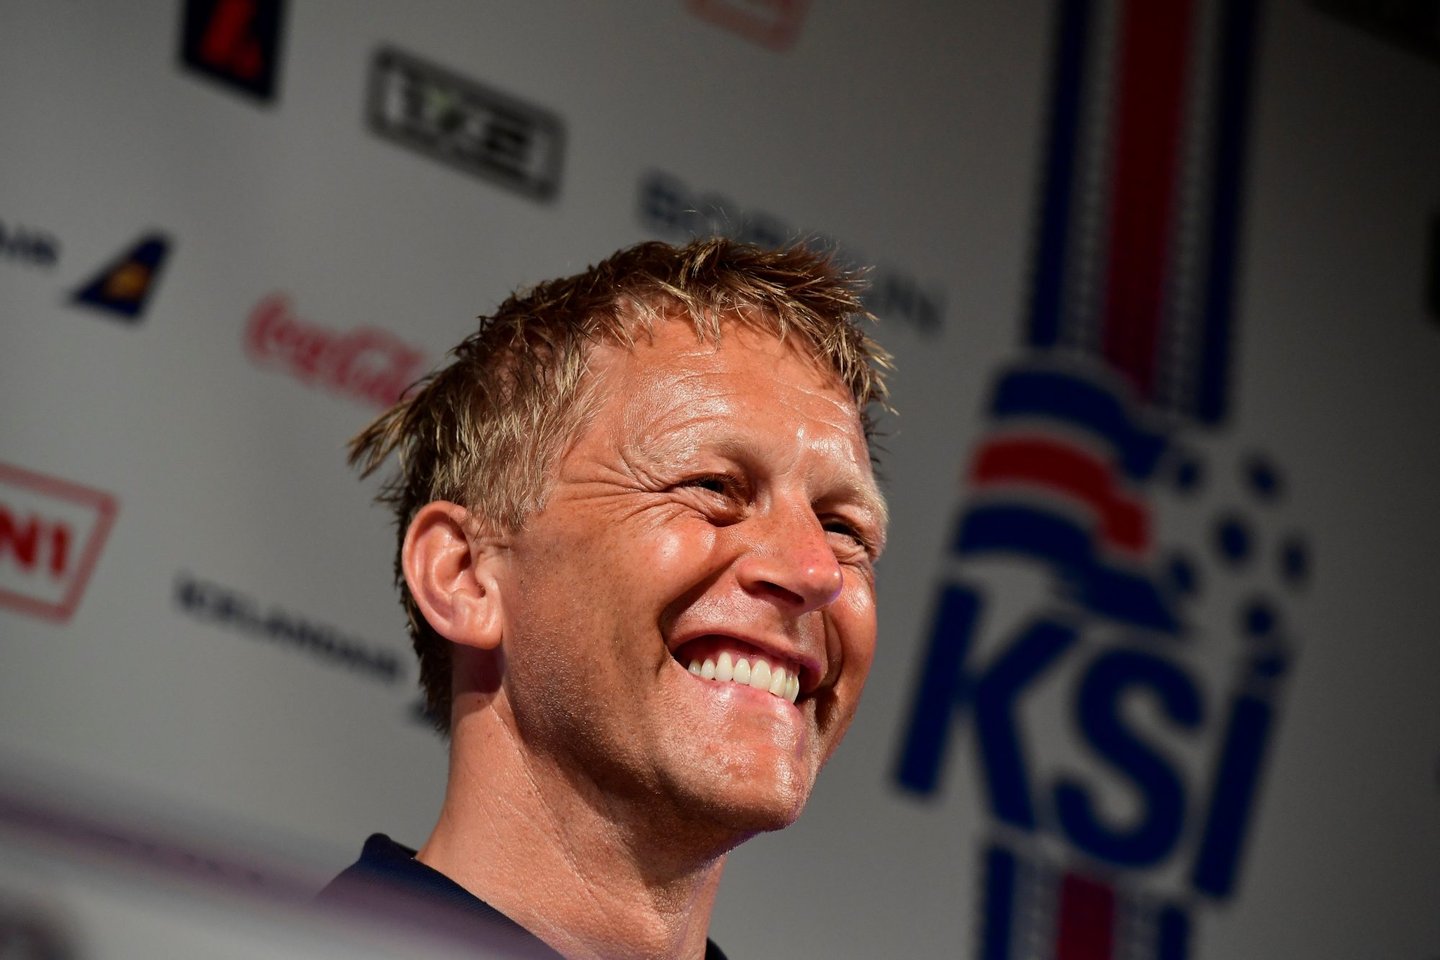 Iceland's coach Heimir Hallgrimsson gives a press conference, on June 29, 2016 in Annecy, four days ahead of the team's quarter final match against France as part of the Euro 2016 European football championship. / AFP / TOBIAS SCHWARZ (Photo credit should read TOBIAS SCHWARZ/AFP/Getty Images)